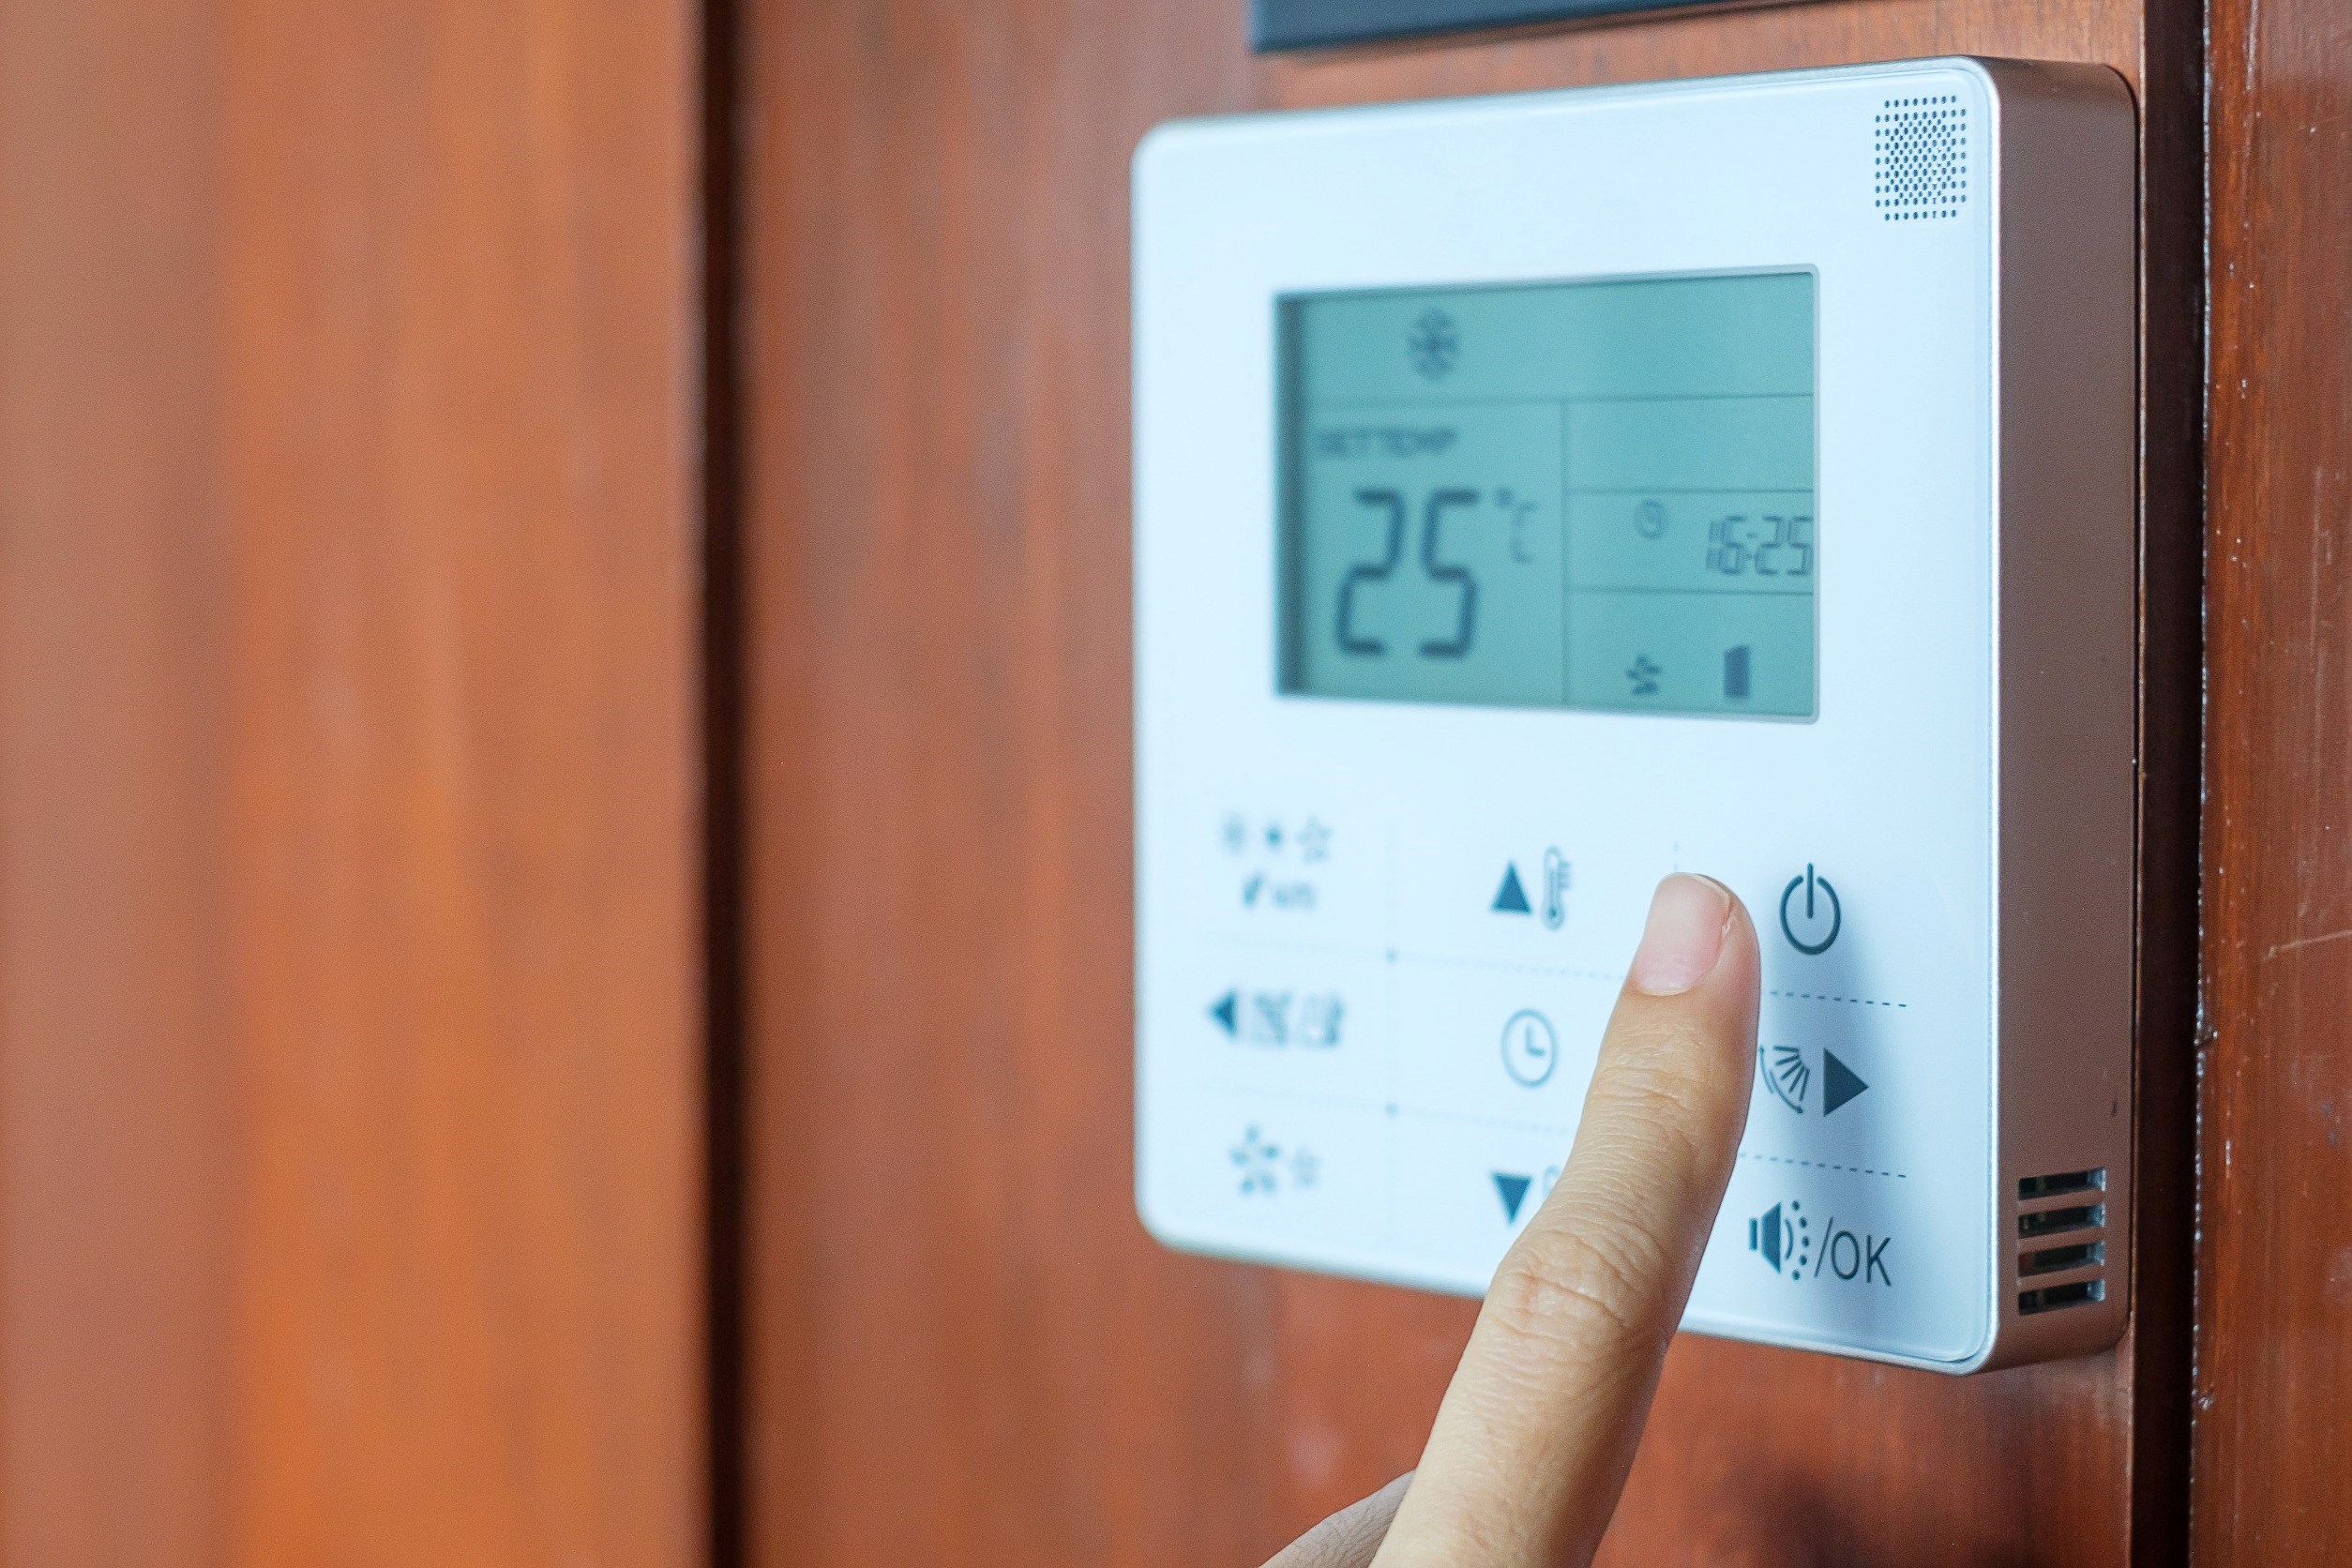 The Best Thermostat Temperature For Summer